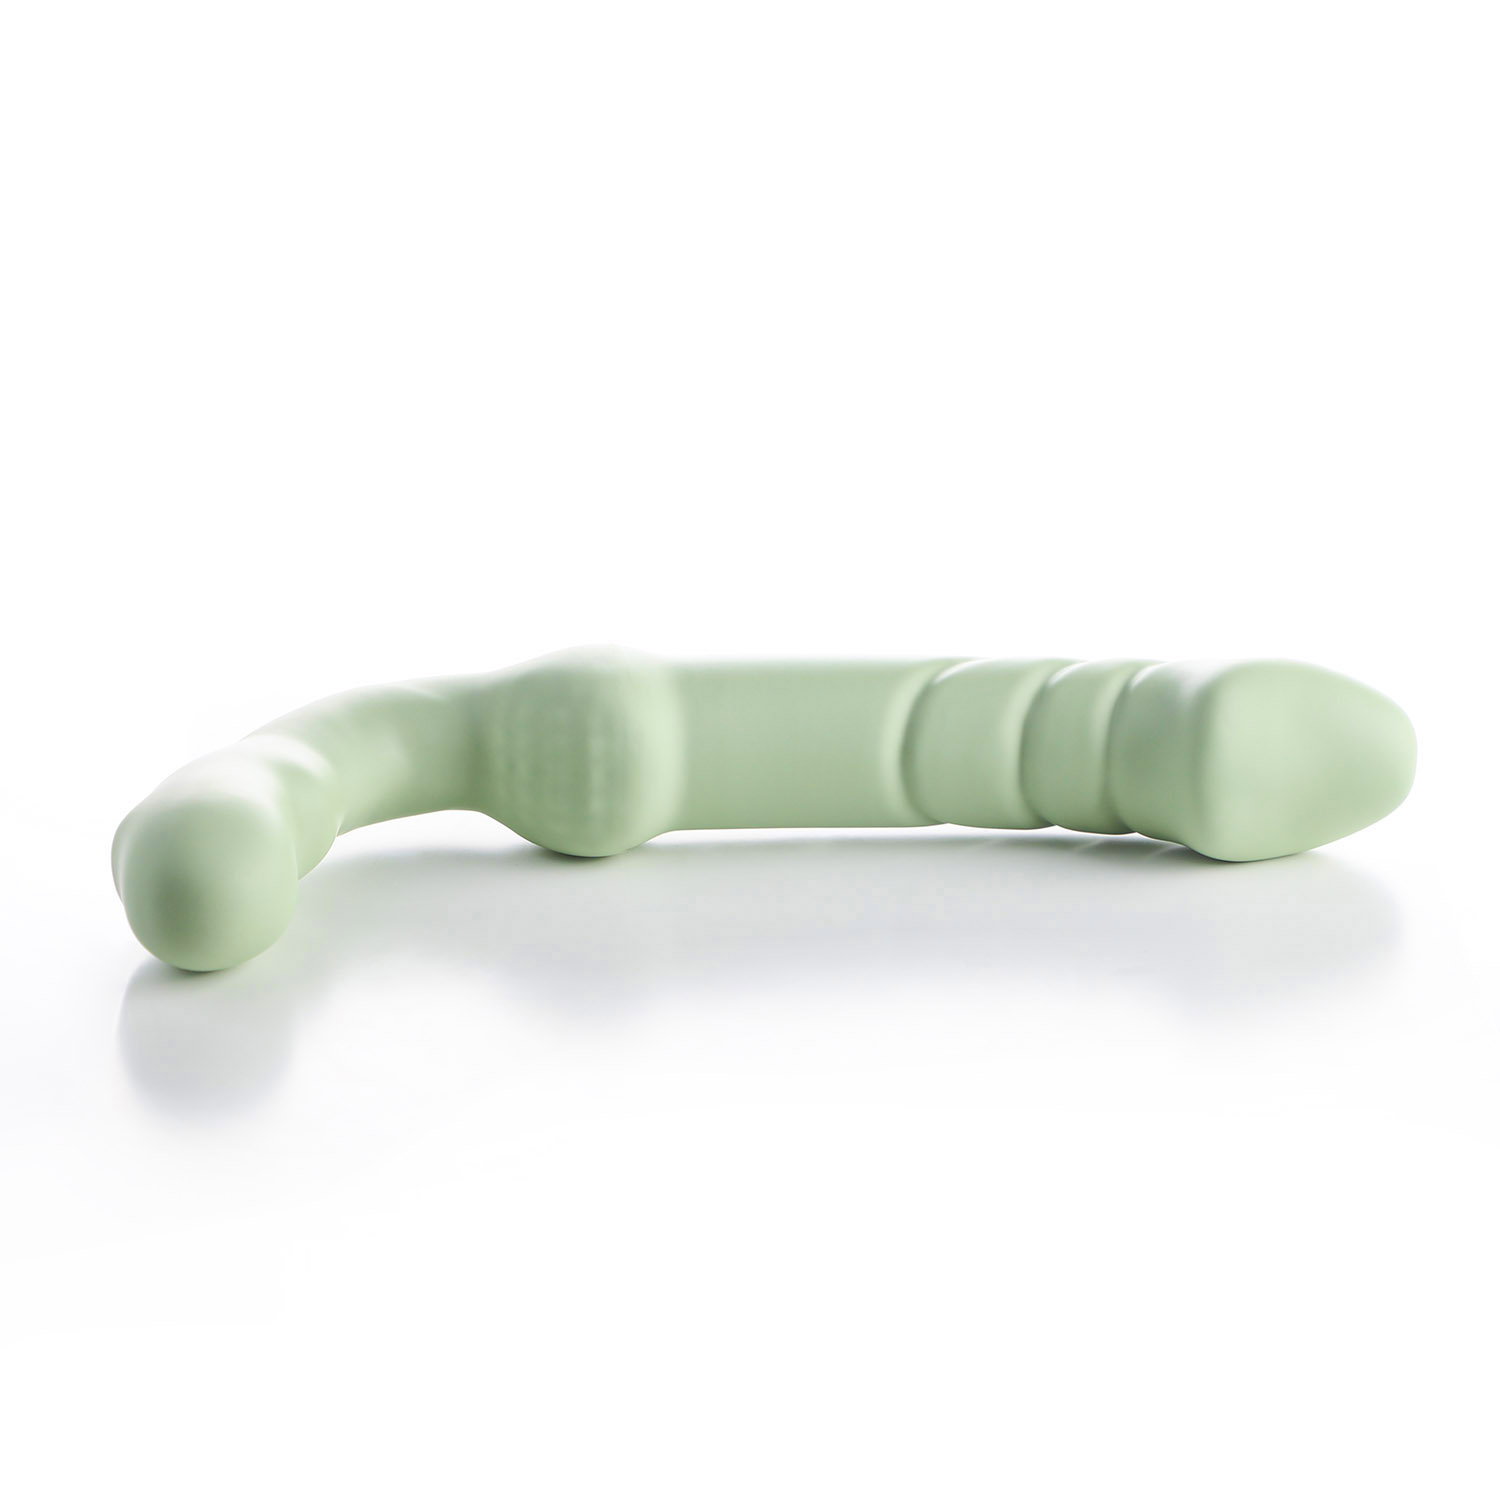 DEVOTION DOUBLE-ENDED STRAP-ON DILDO IN GREEN